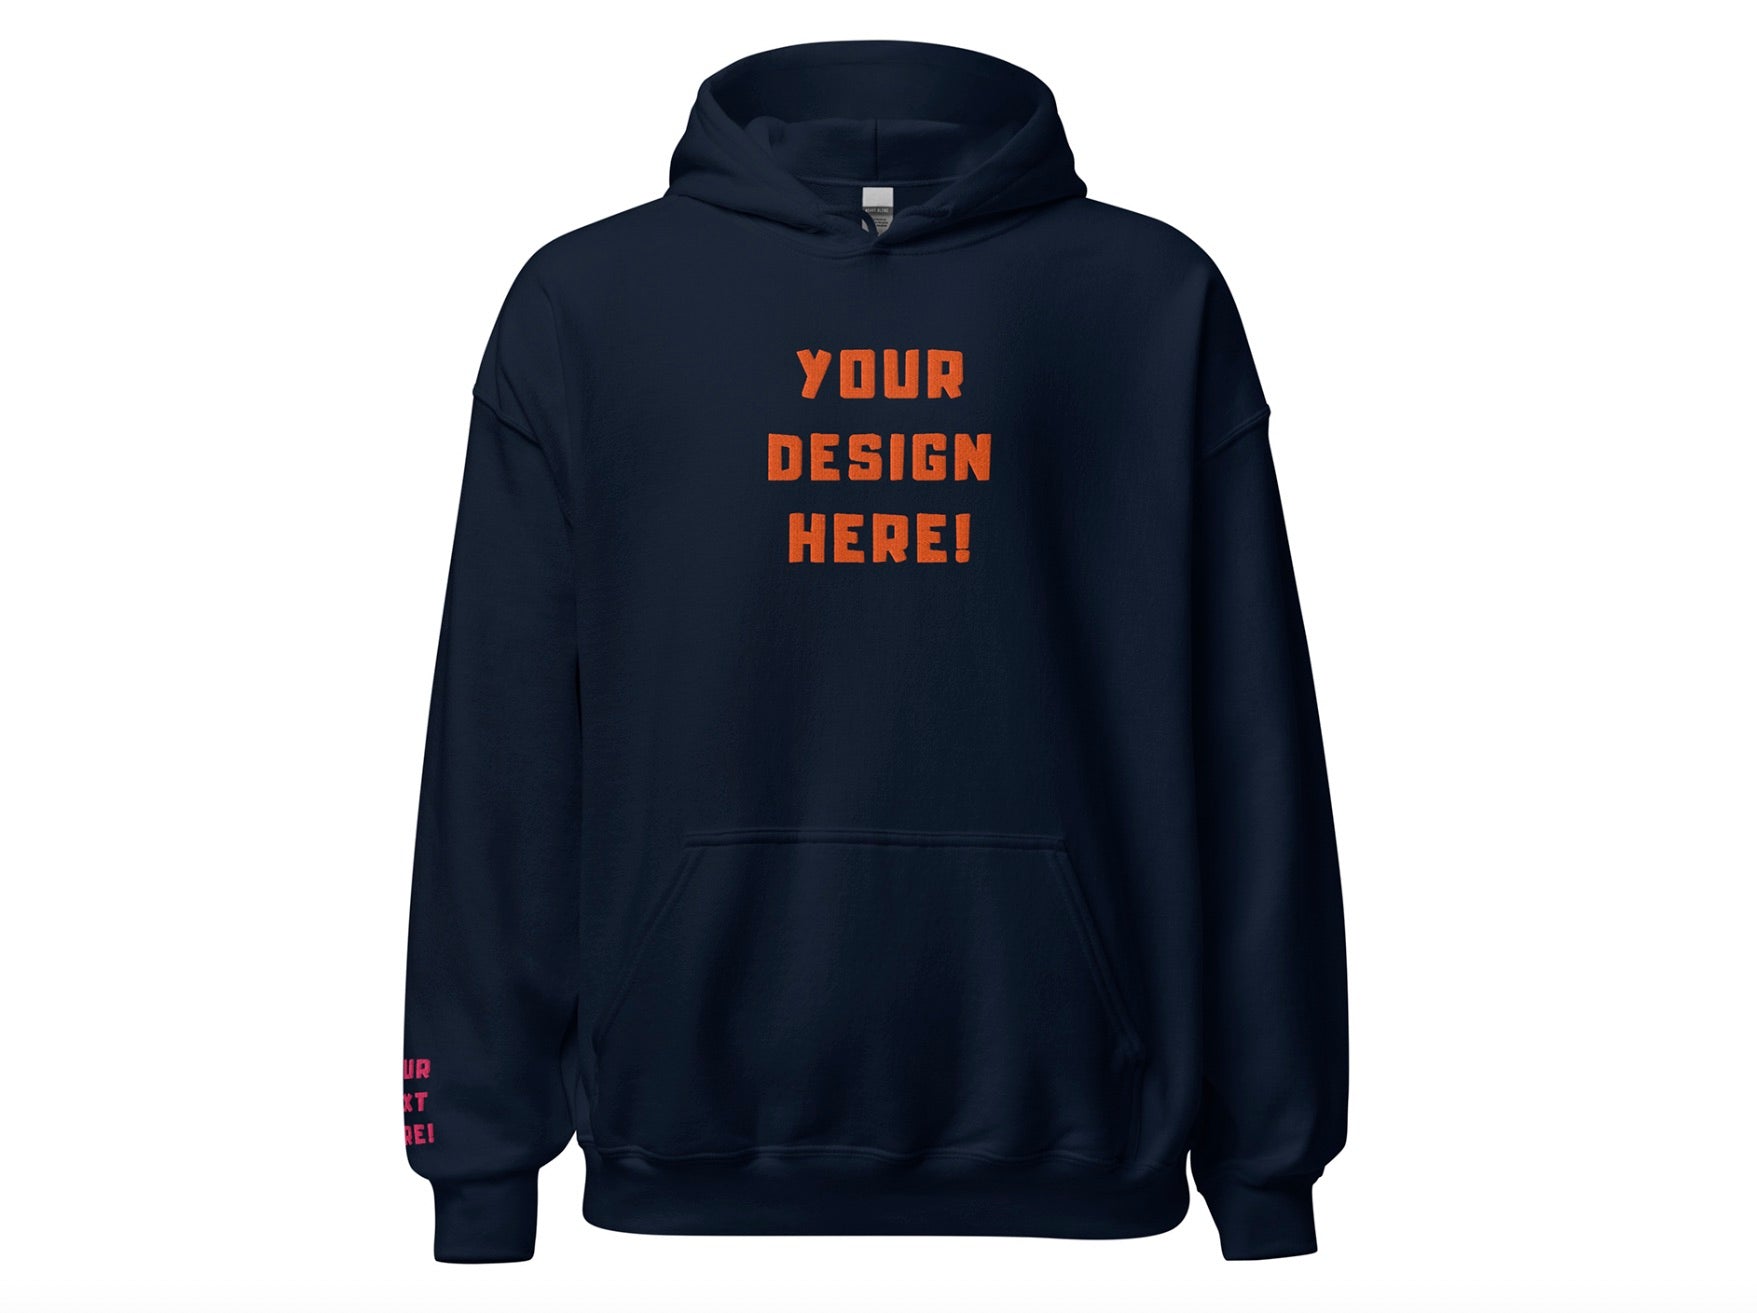 Custom adults embroidered navy hoodie. Sleeve text is customizable. 